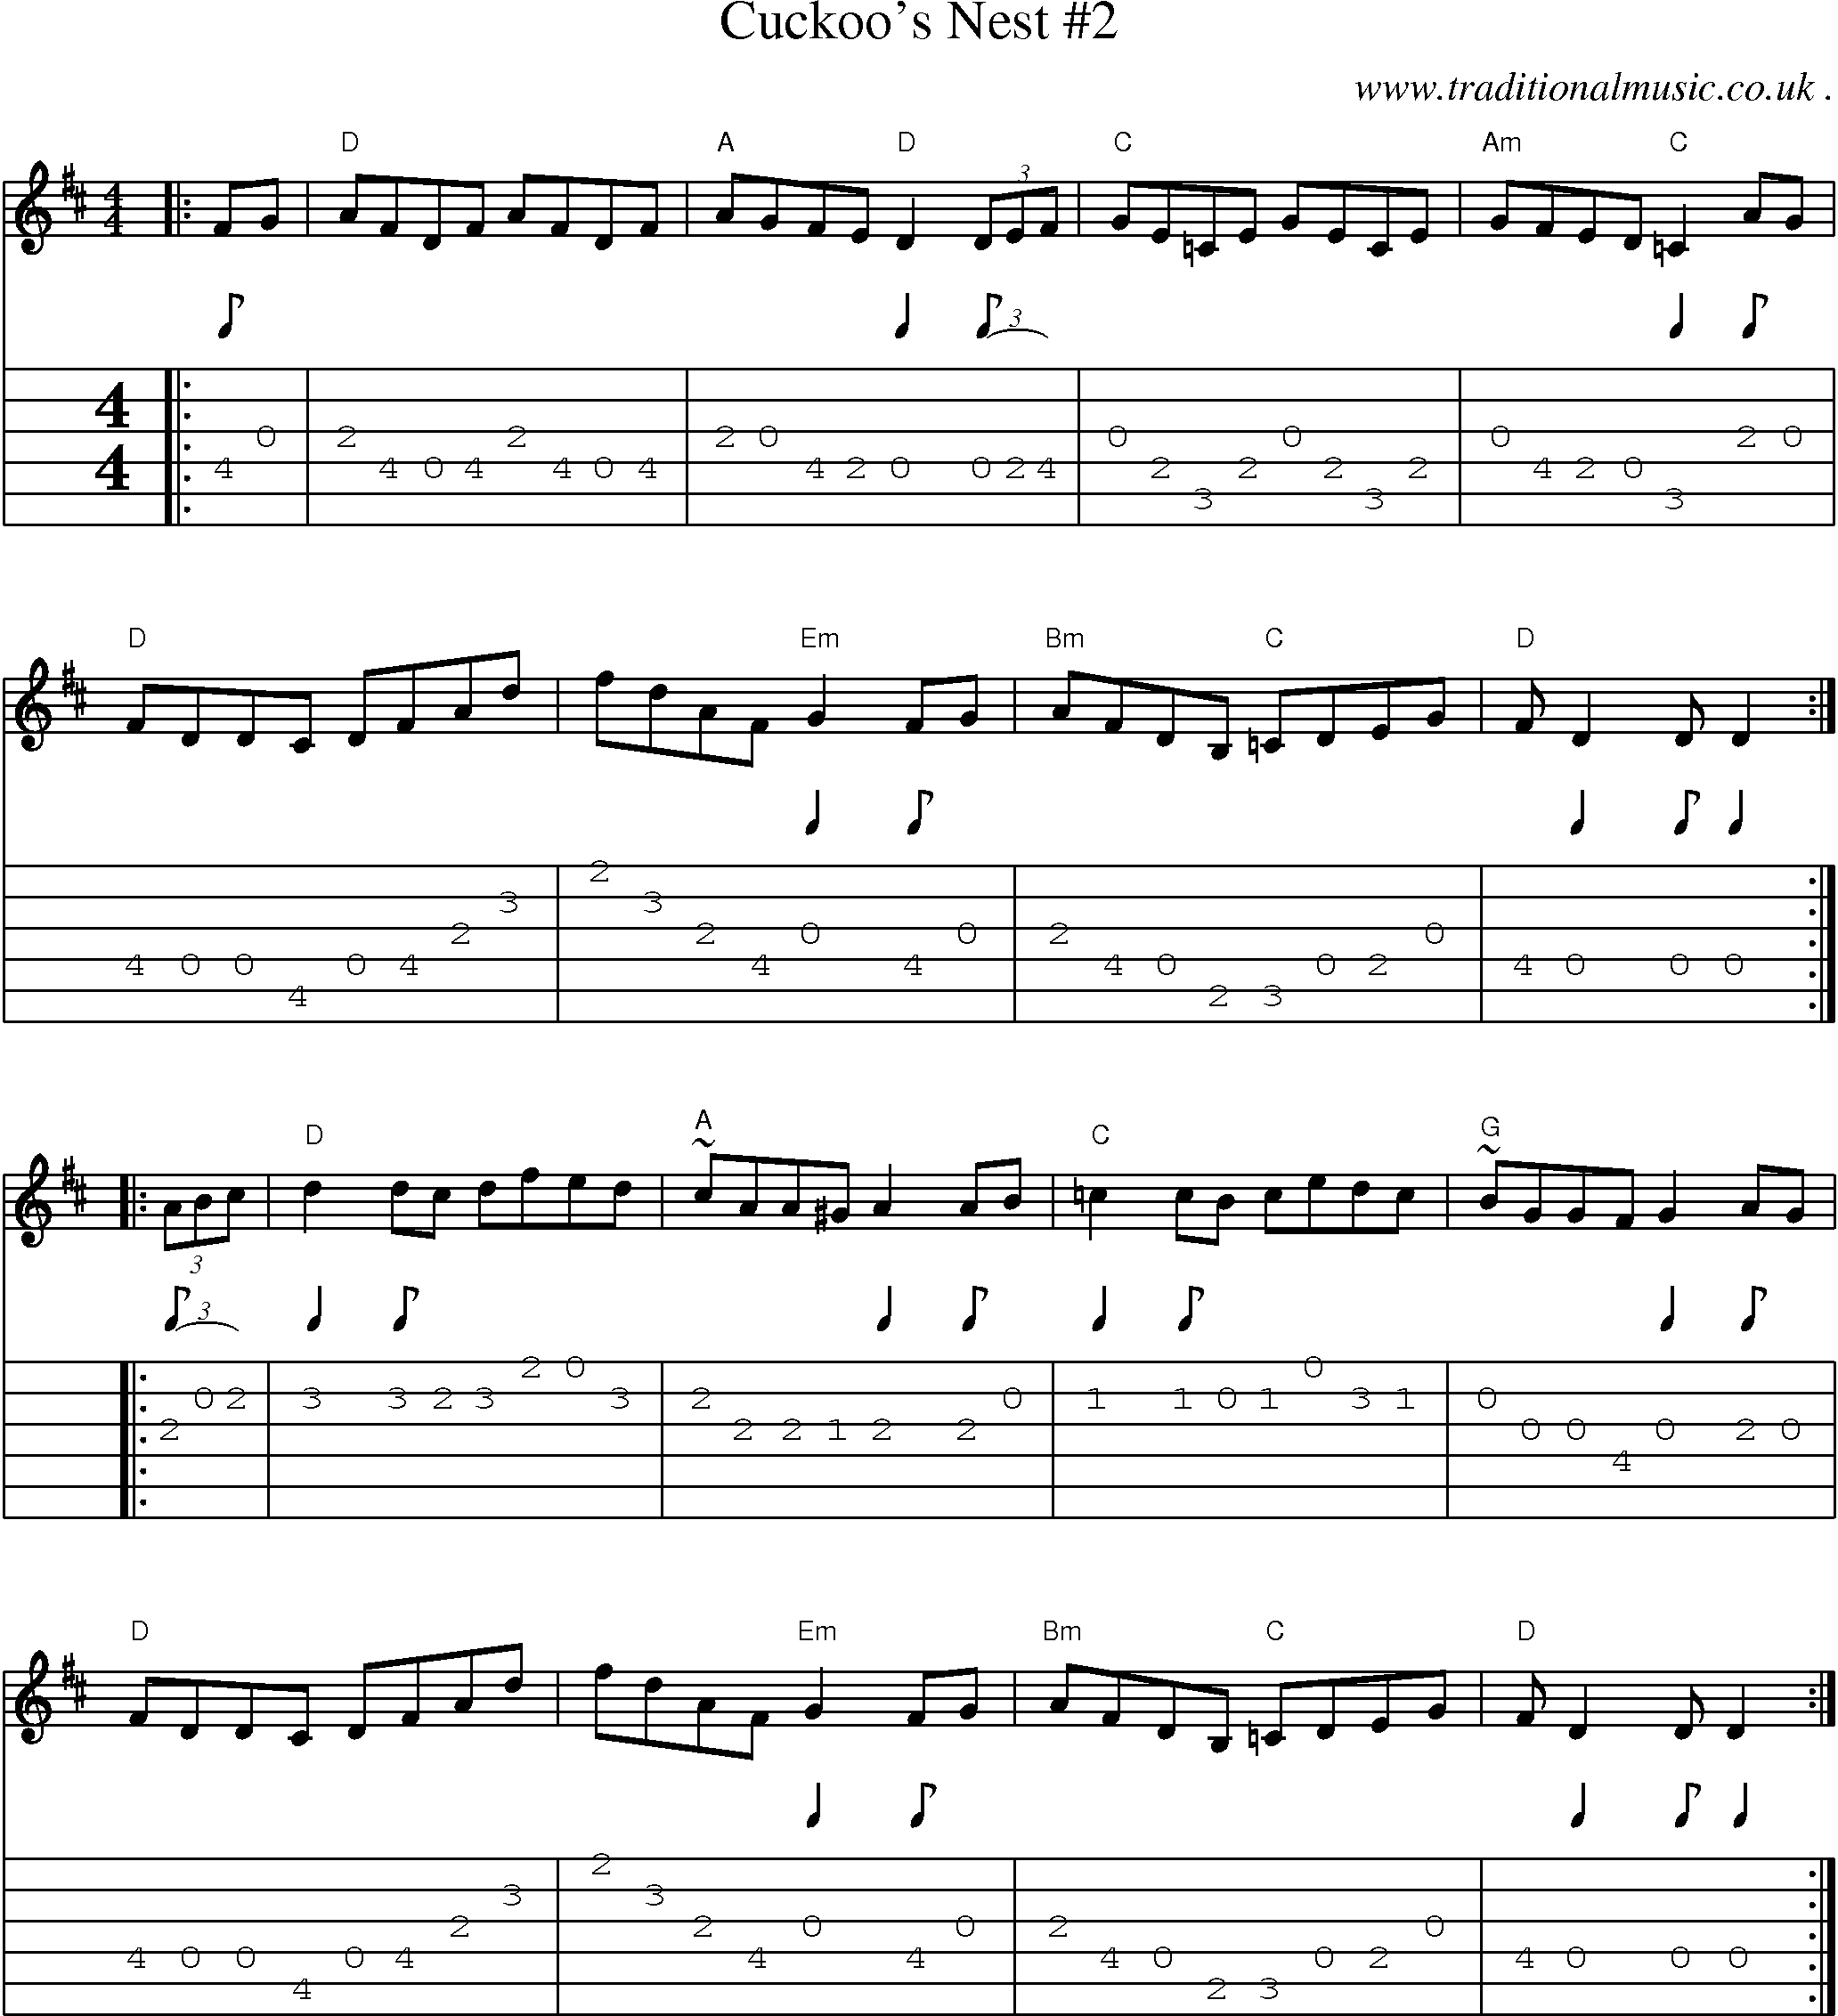 Music Score and Guitar Tabs for Cuckoos Nest 2